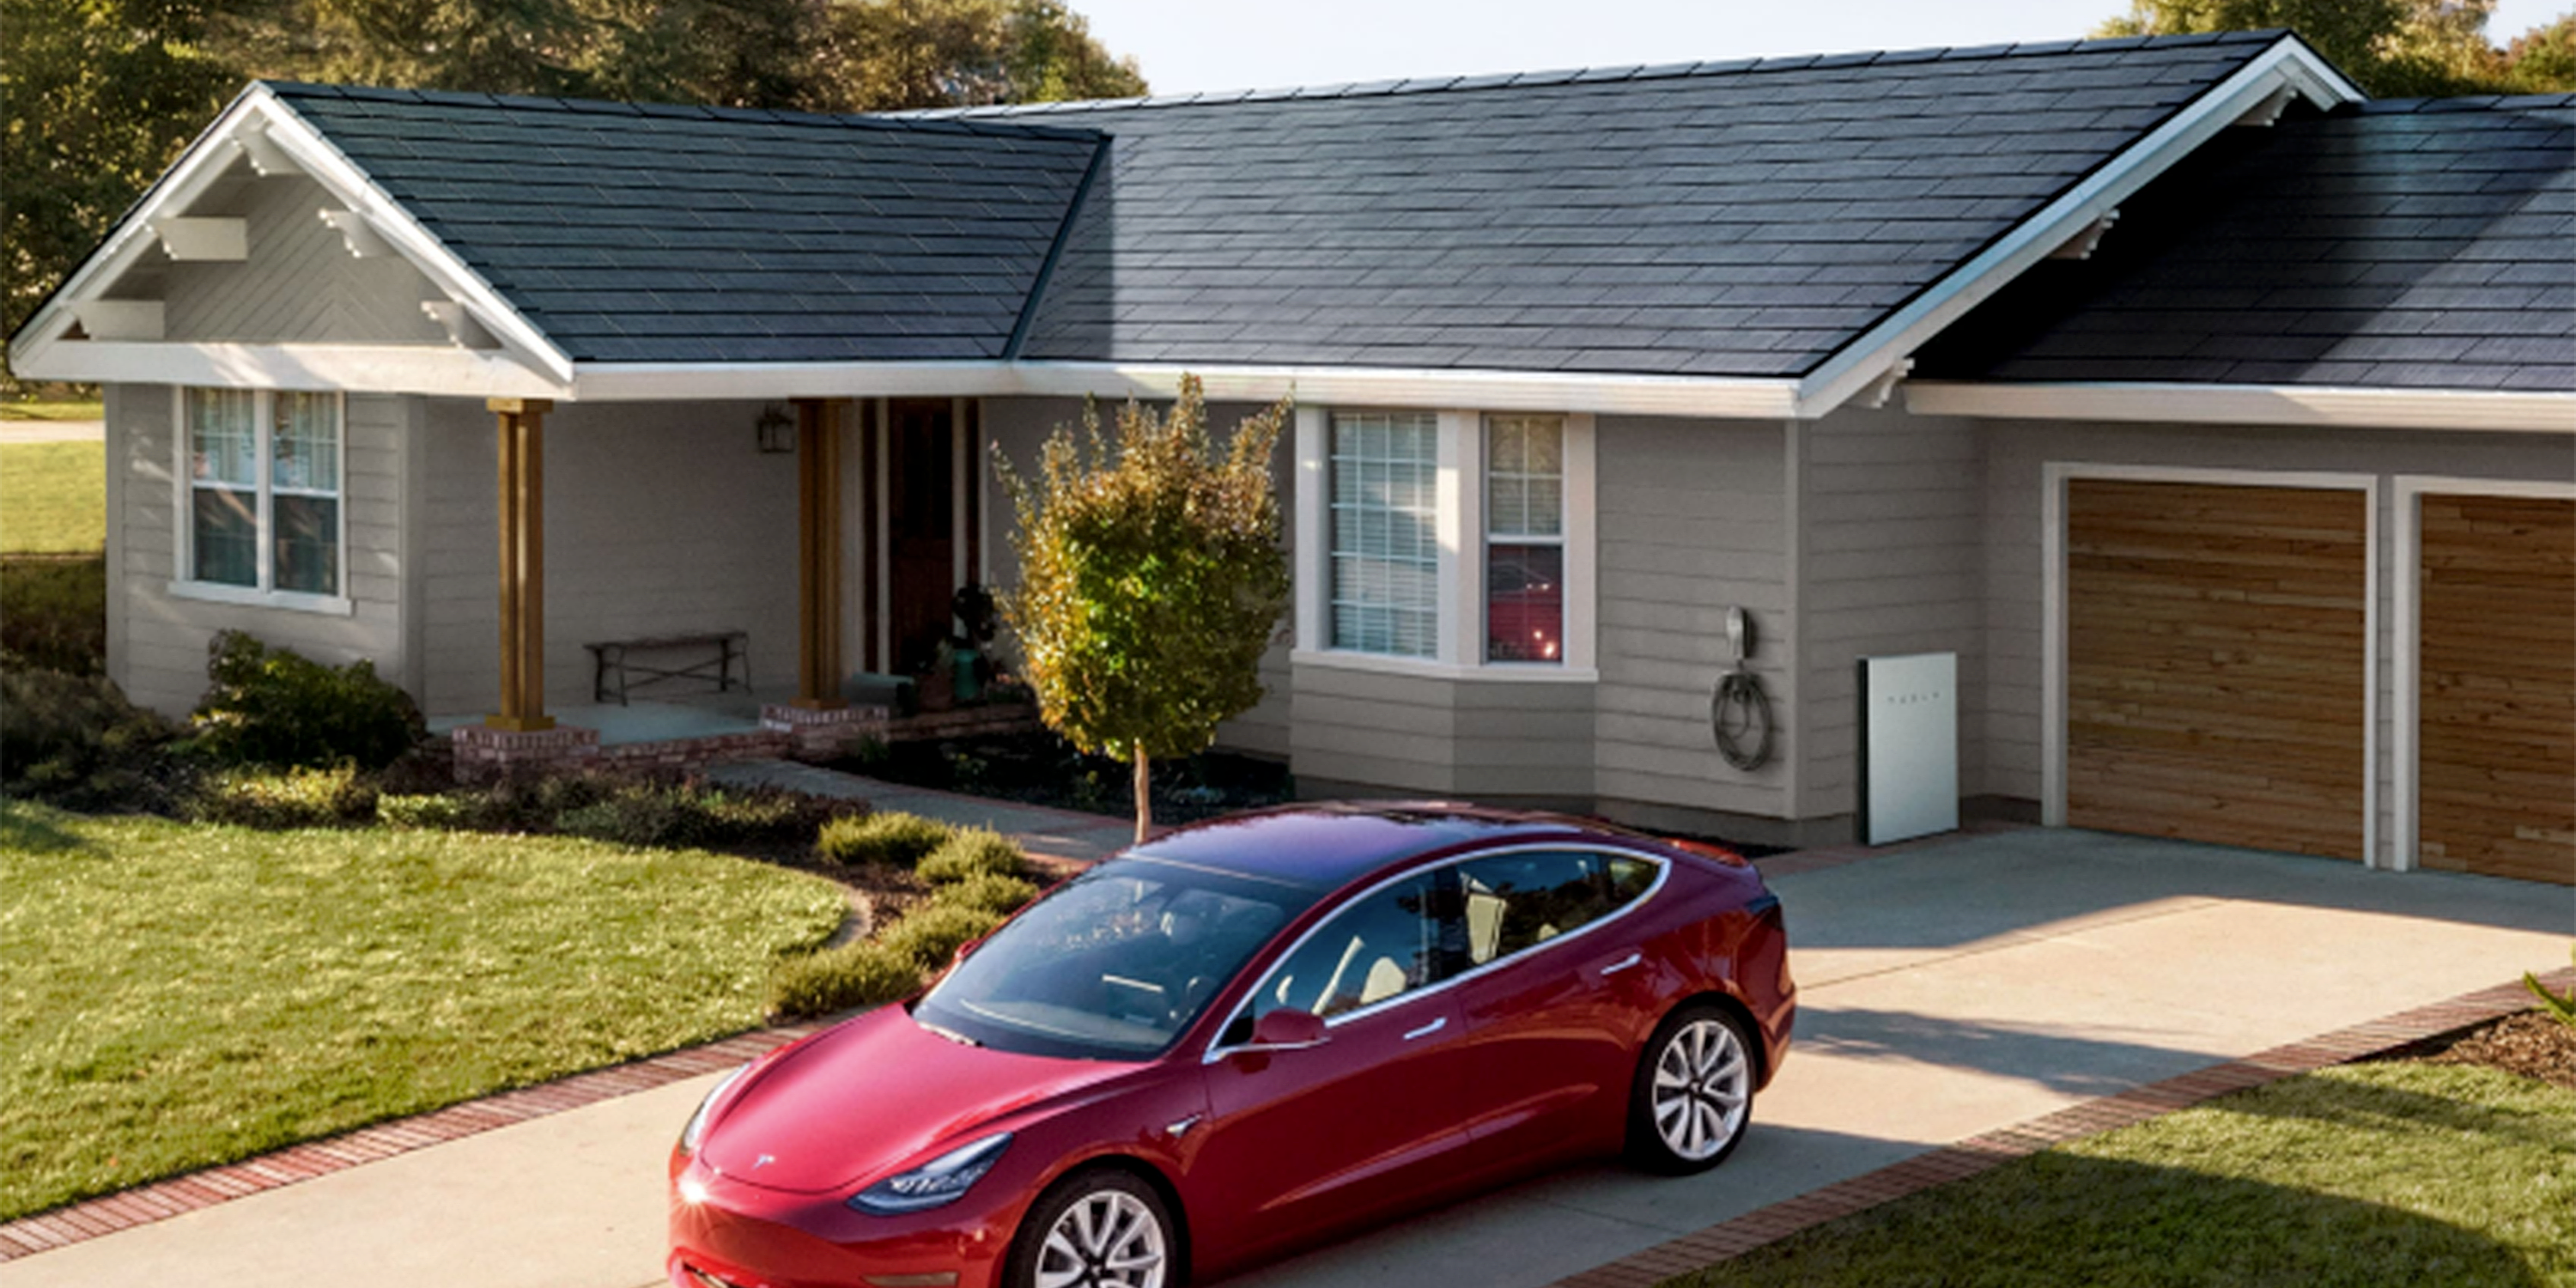 Tesla reveals the latest version of its solar roof, aims for 1,000 installations per week within a few months (TSLA)